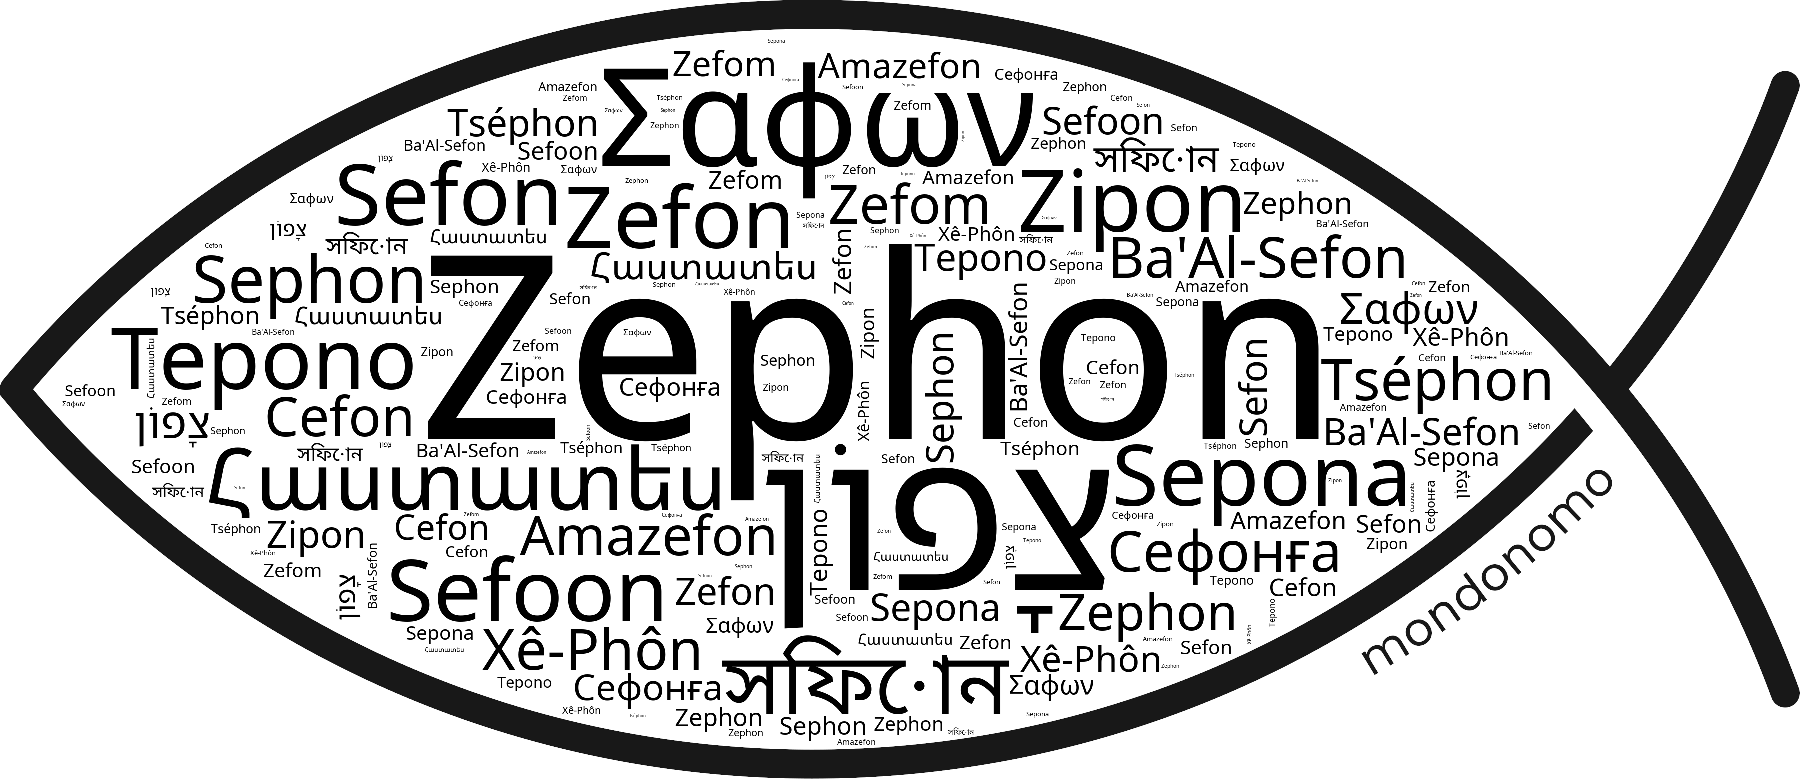 Name Zephon in the world's Bibles